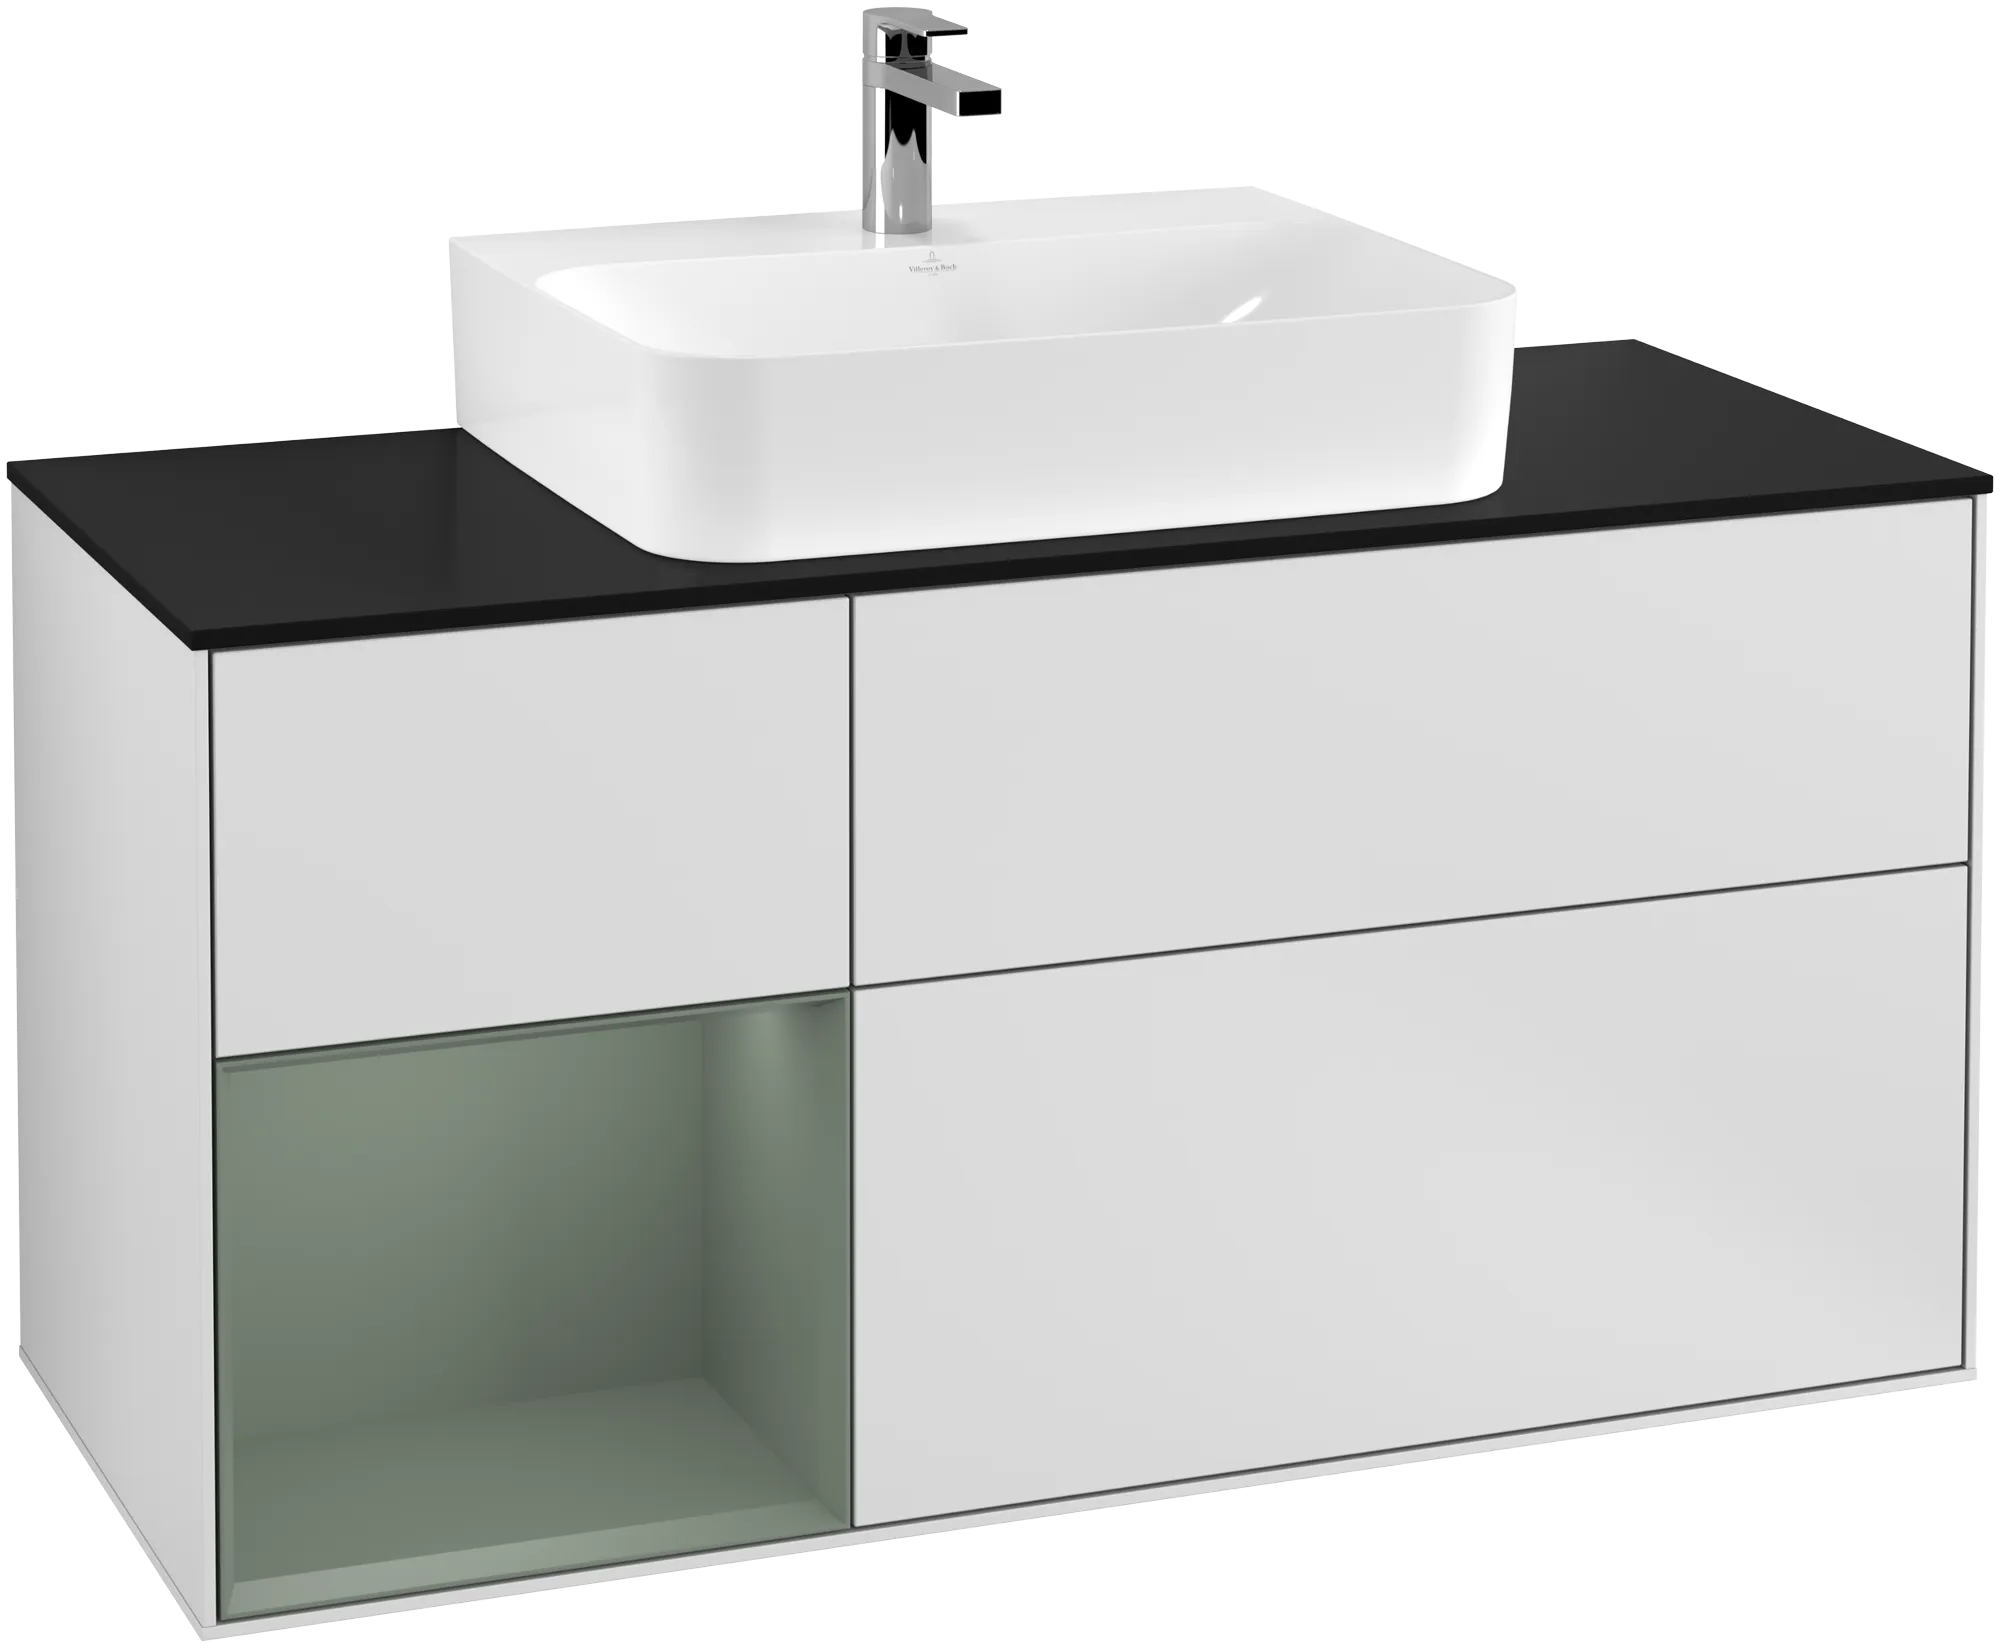 Picture of VILLEROY BOCH Finion Vanity unit, with lighting, 3 pull-out compartments, 1200 x 603 x 501 mm, White Matt Lacquer / Olive Matt Lacquer / Glass Black Matt #G162GMMT